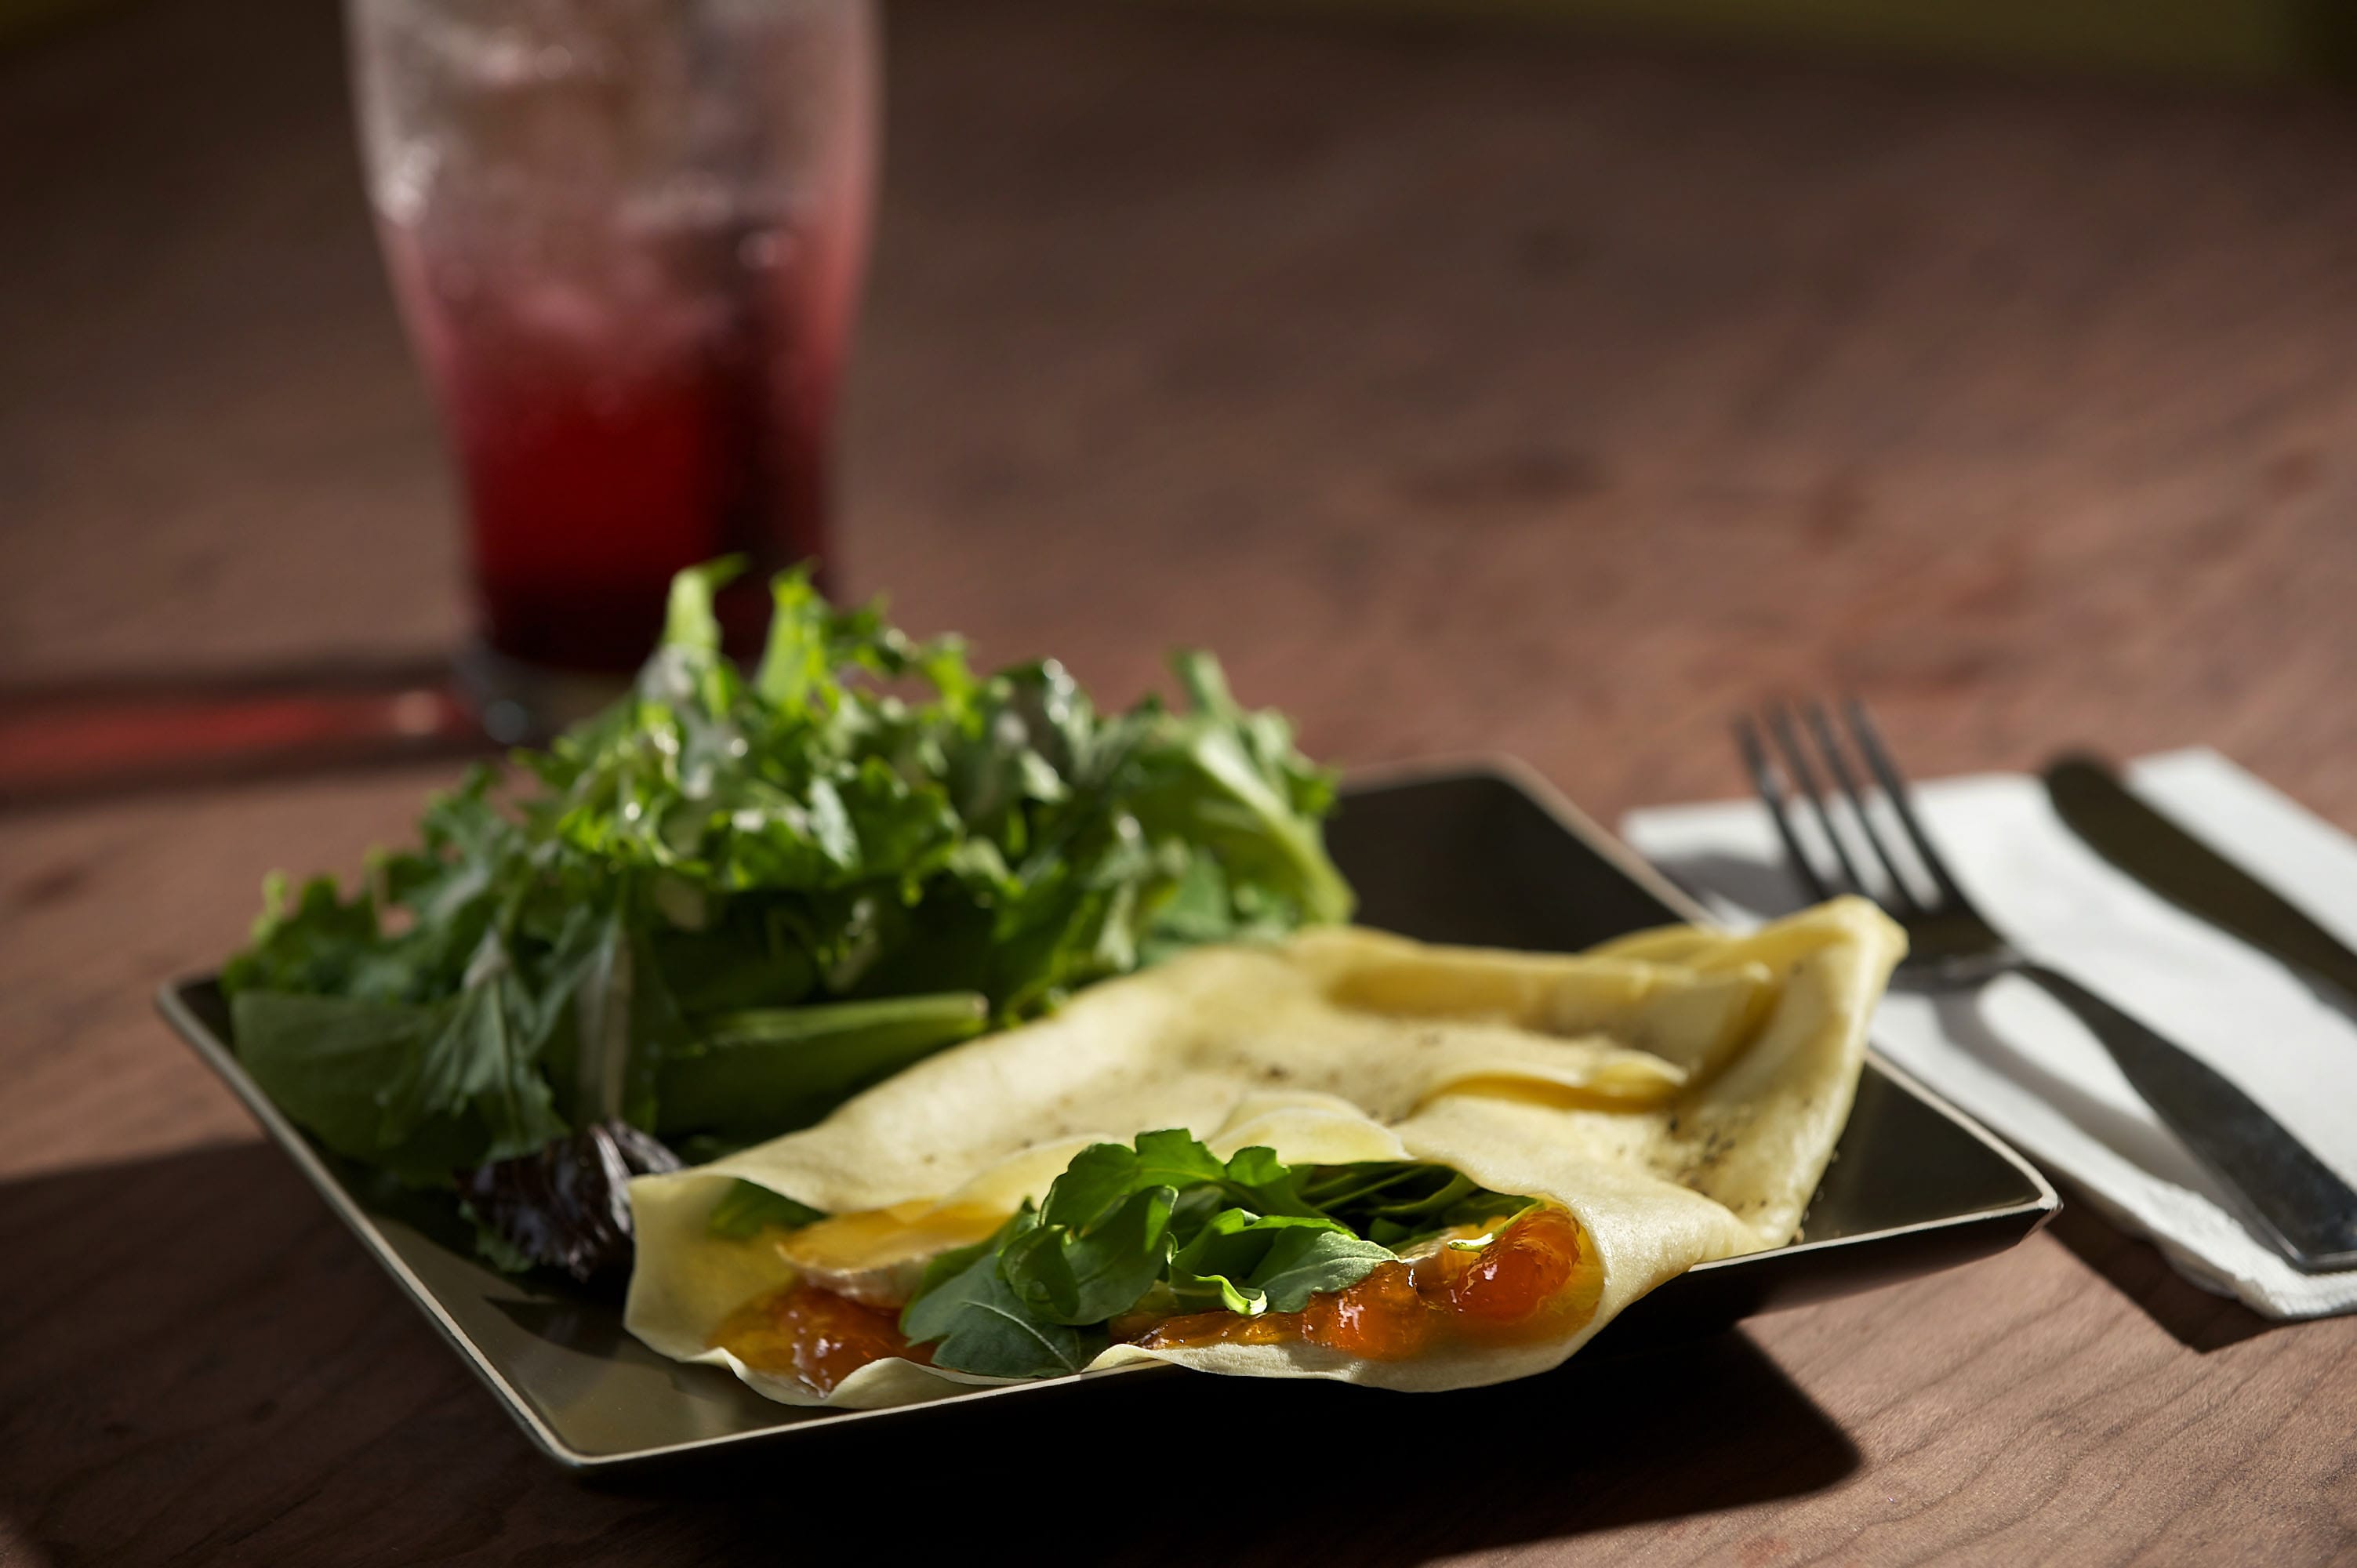 The Frenchie, a savory crepe, pairs with house-made blackcurrant soda at C'est La Vie in downtown Battle Ground.